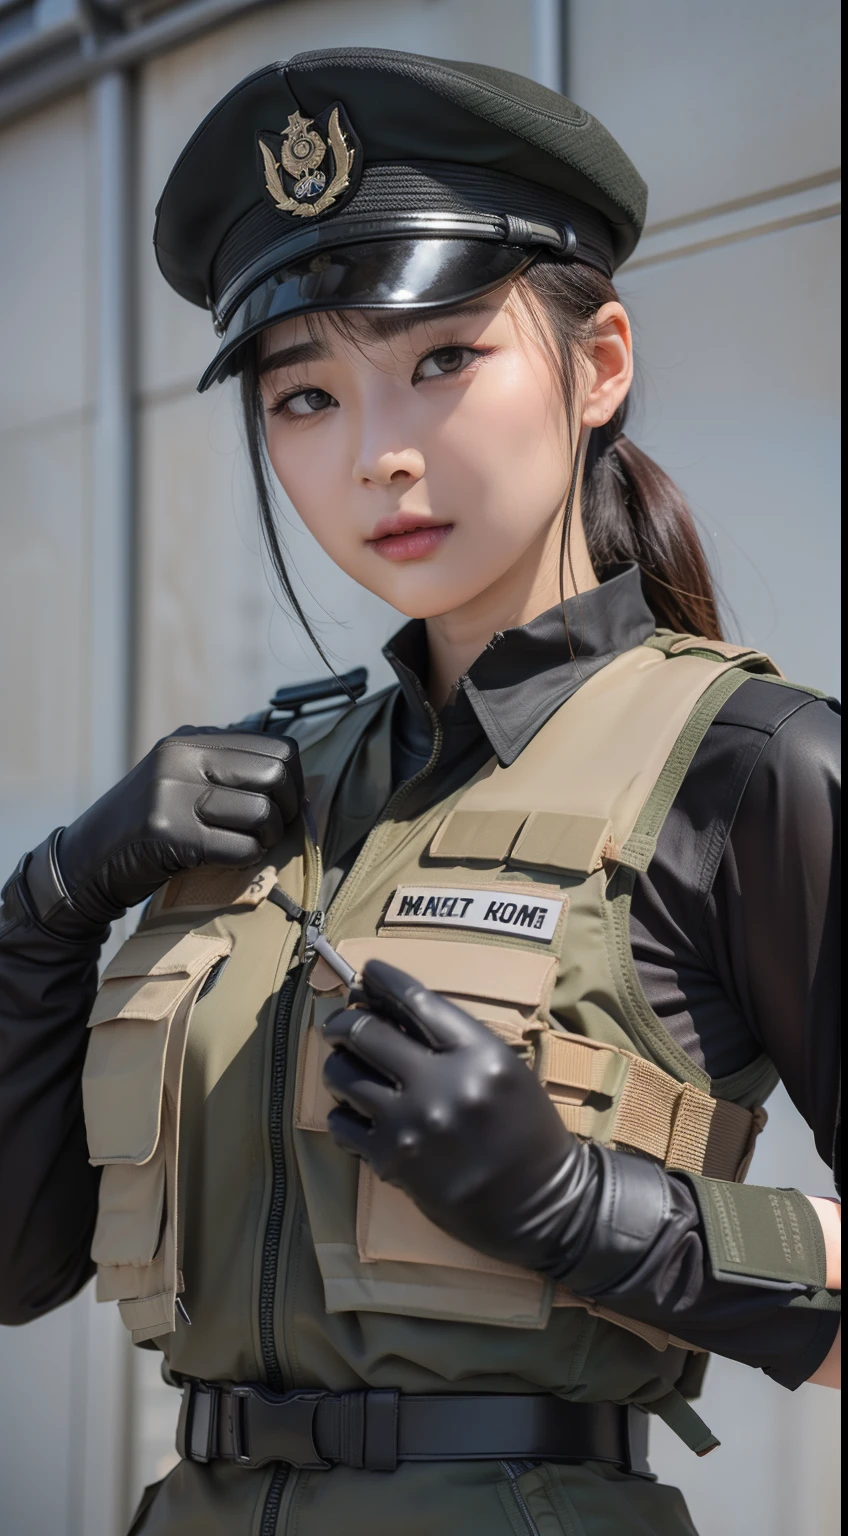 Korean woman, A tough and strong woman wearing army clothing with a bulletproof vest, rank badges, gloves, black glove, cap, look at viewer